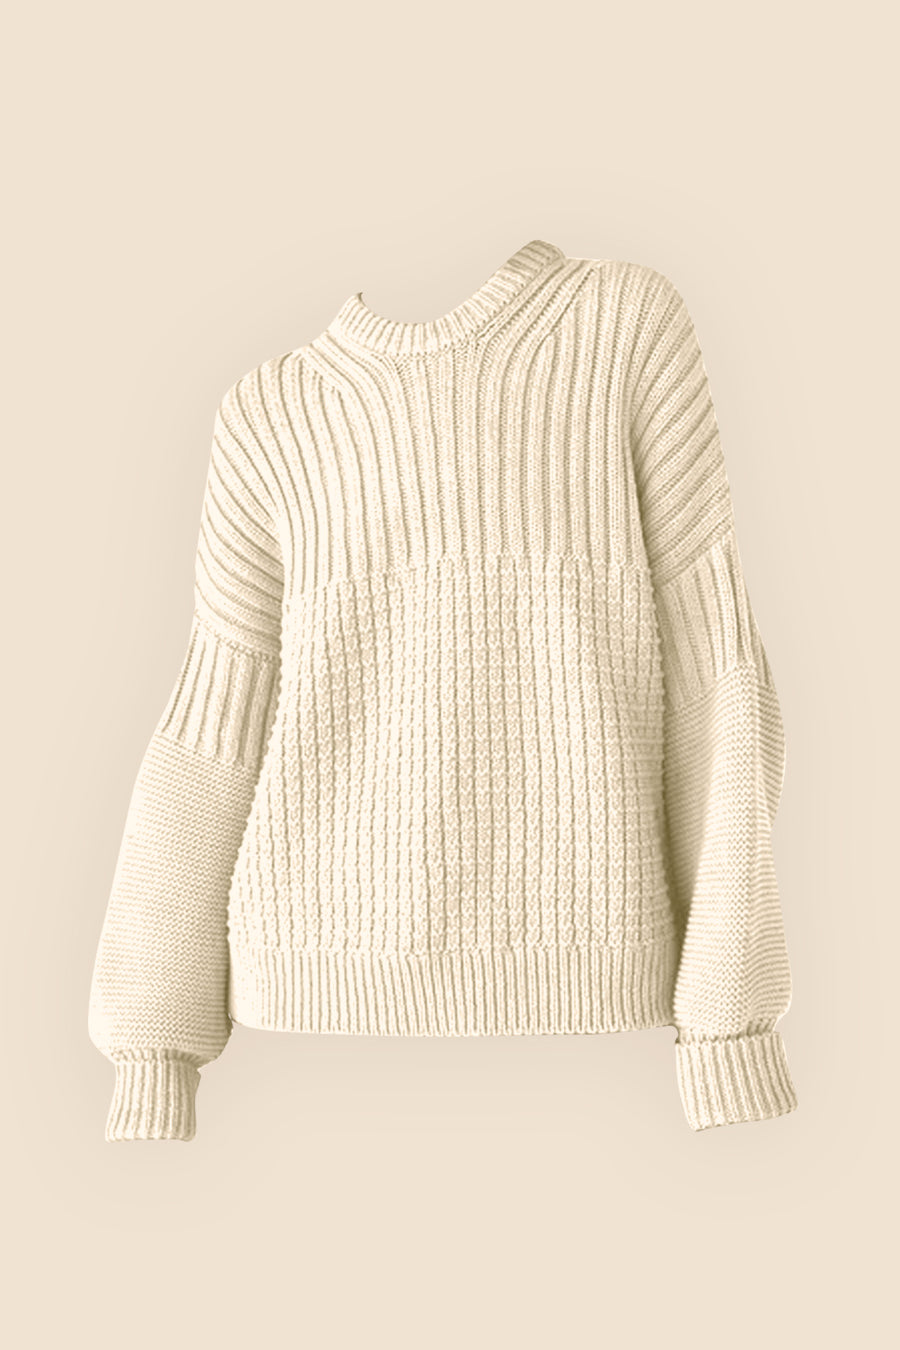 The Knotty Ones Delčia Off white sweater - shopsigal